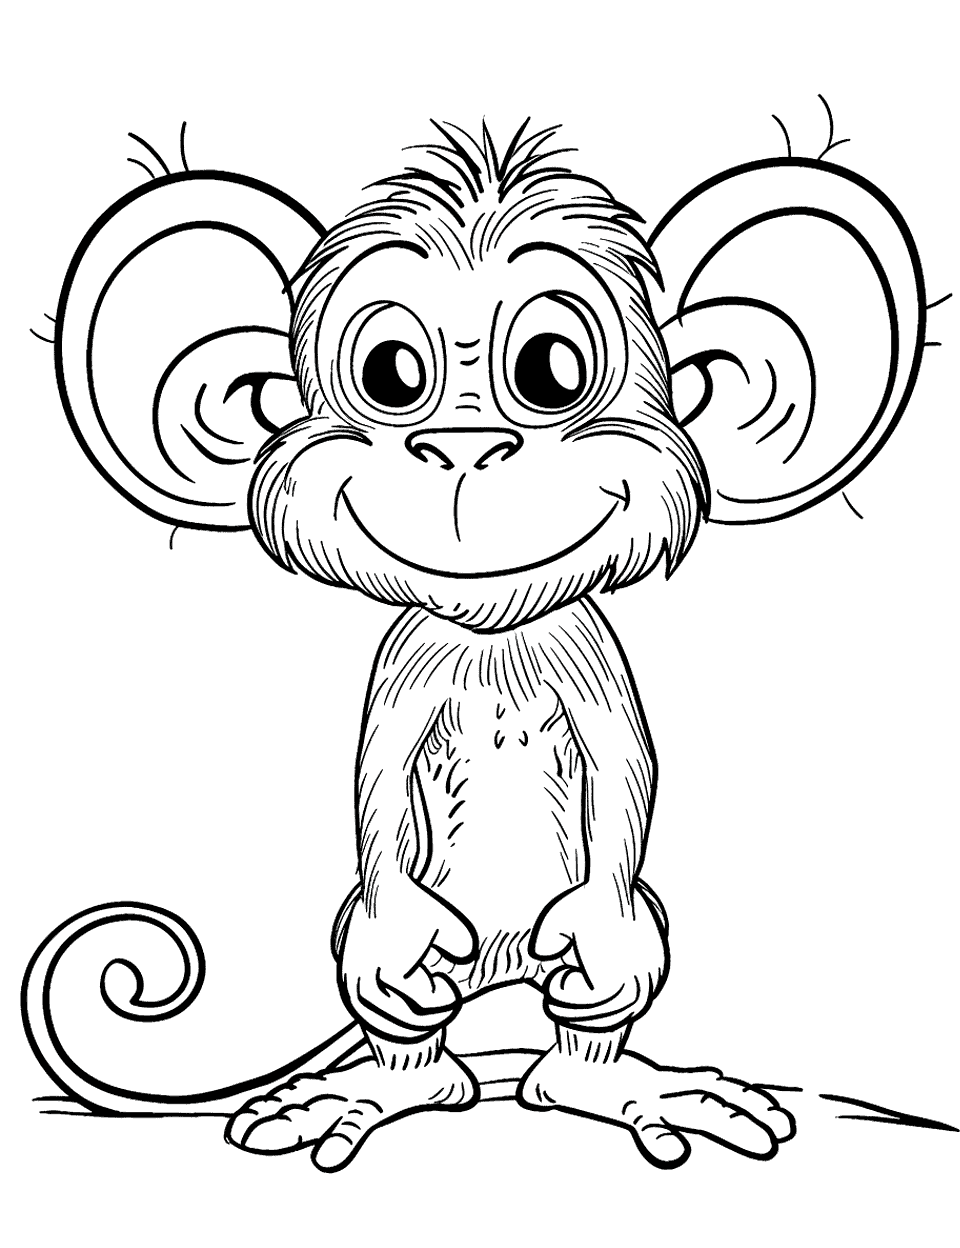 Monkey with Oversized Ears Coloring Page - A comic-style monkey with exaggerated large ears, standing and grinning.